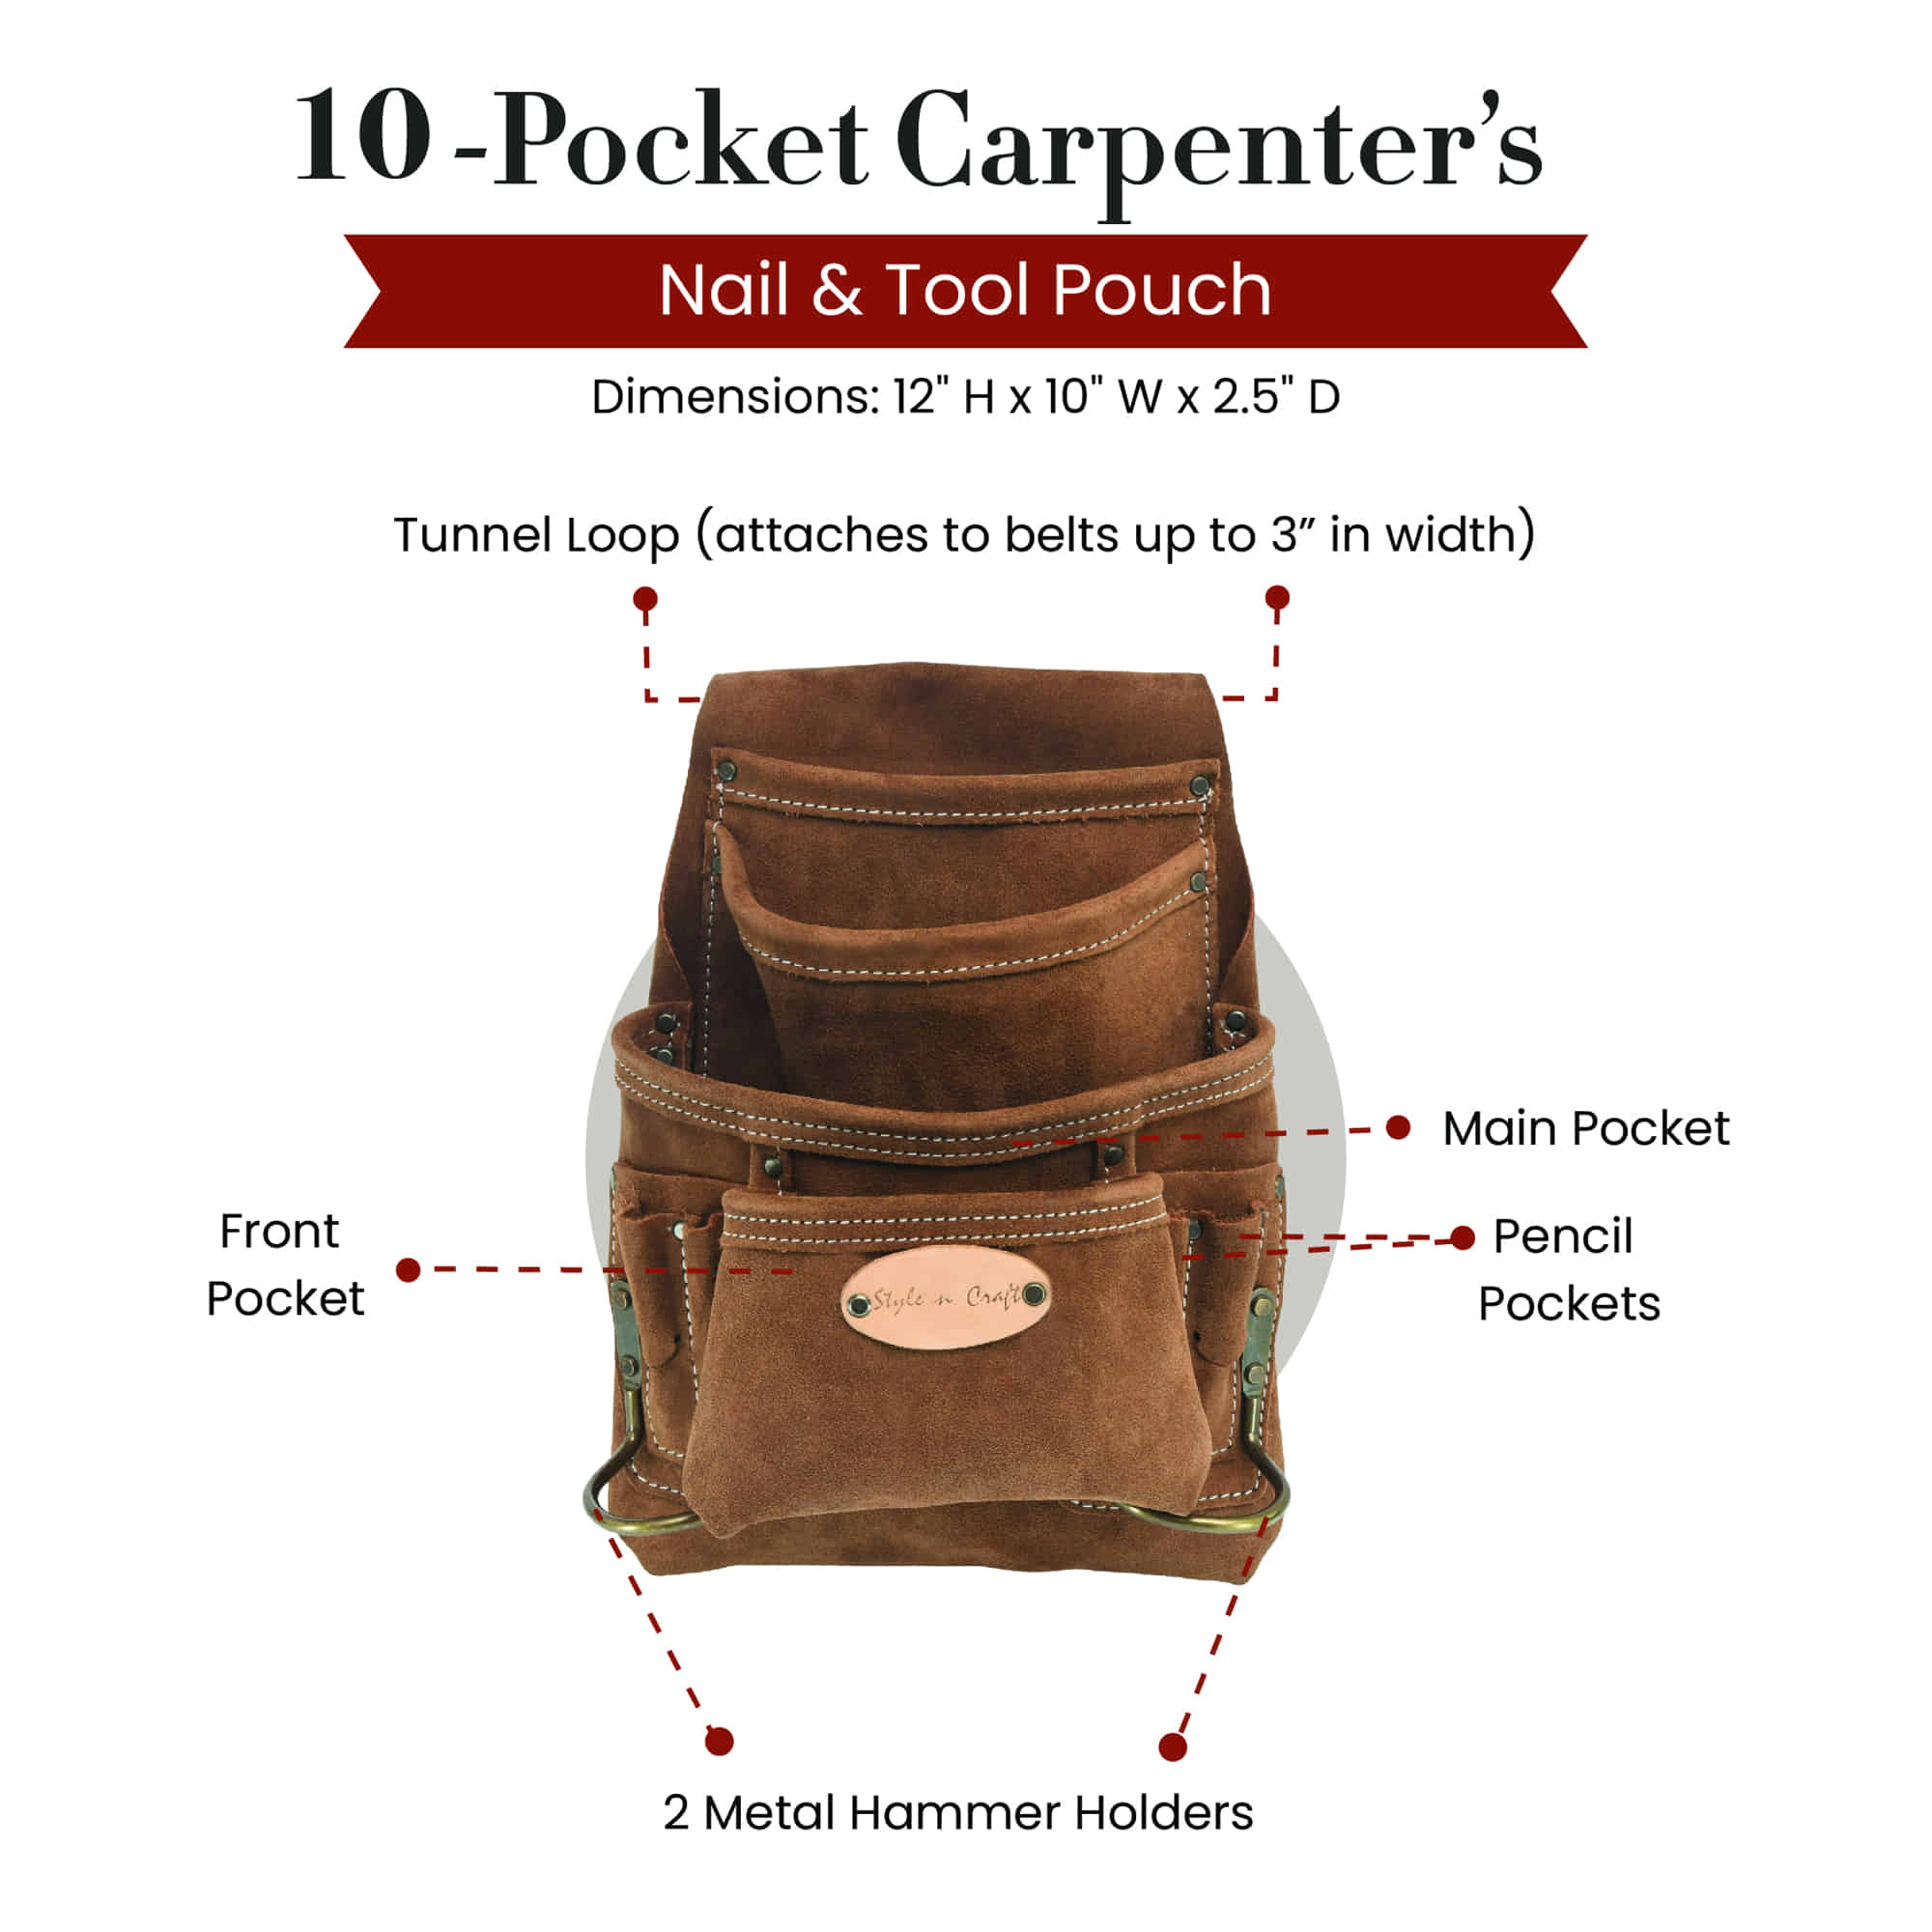 10 Pocket Carpenter's Nail and Tool Pouch in Suede Leather